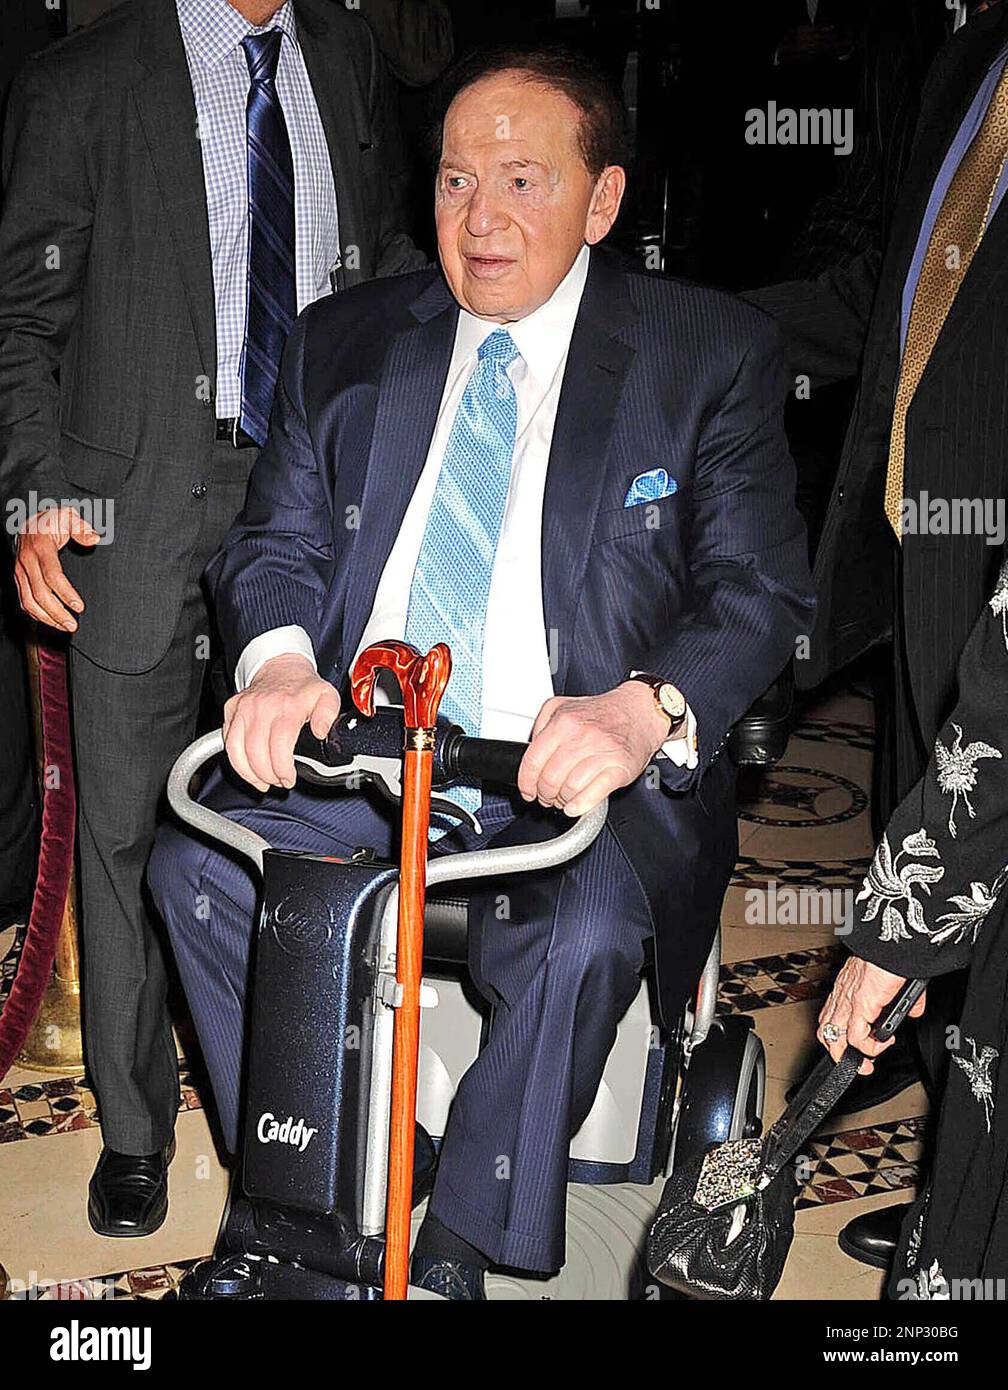 Photo by: Demis Maryannakis/STAR MAX/IPx 1/12/21 Sheldon Adelson, Republican Kingmaker and casino magnate, has passed away at age 87. STAR MAX File Photo: 5/18/14 Sheldon Adelson at The Champions of Jewish Values International Gala. (NYC) Stock Photo